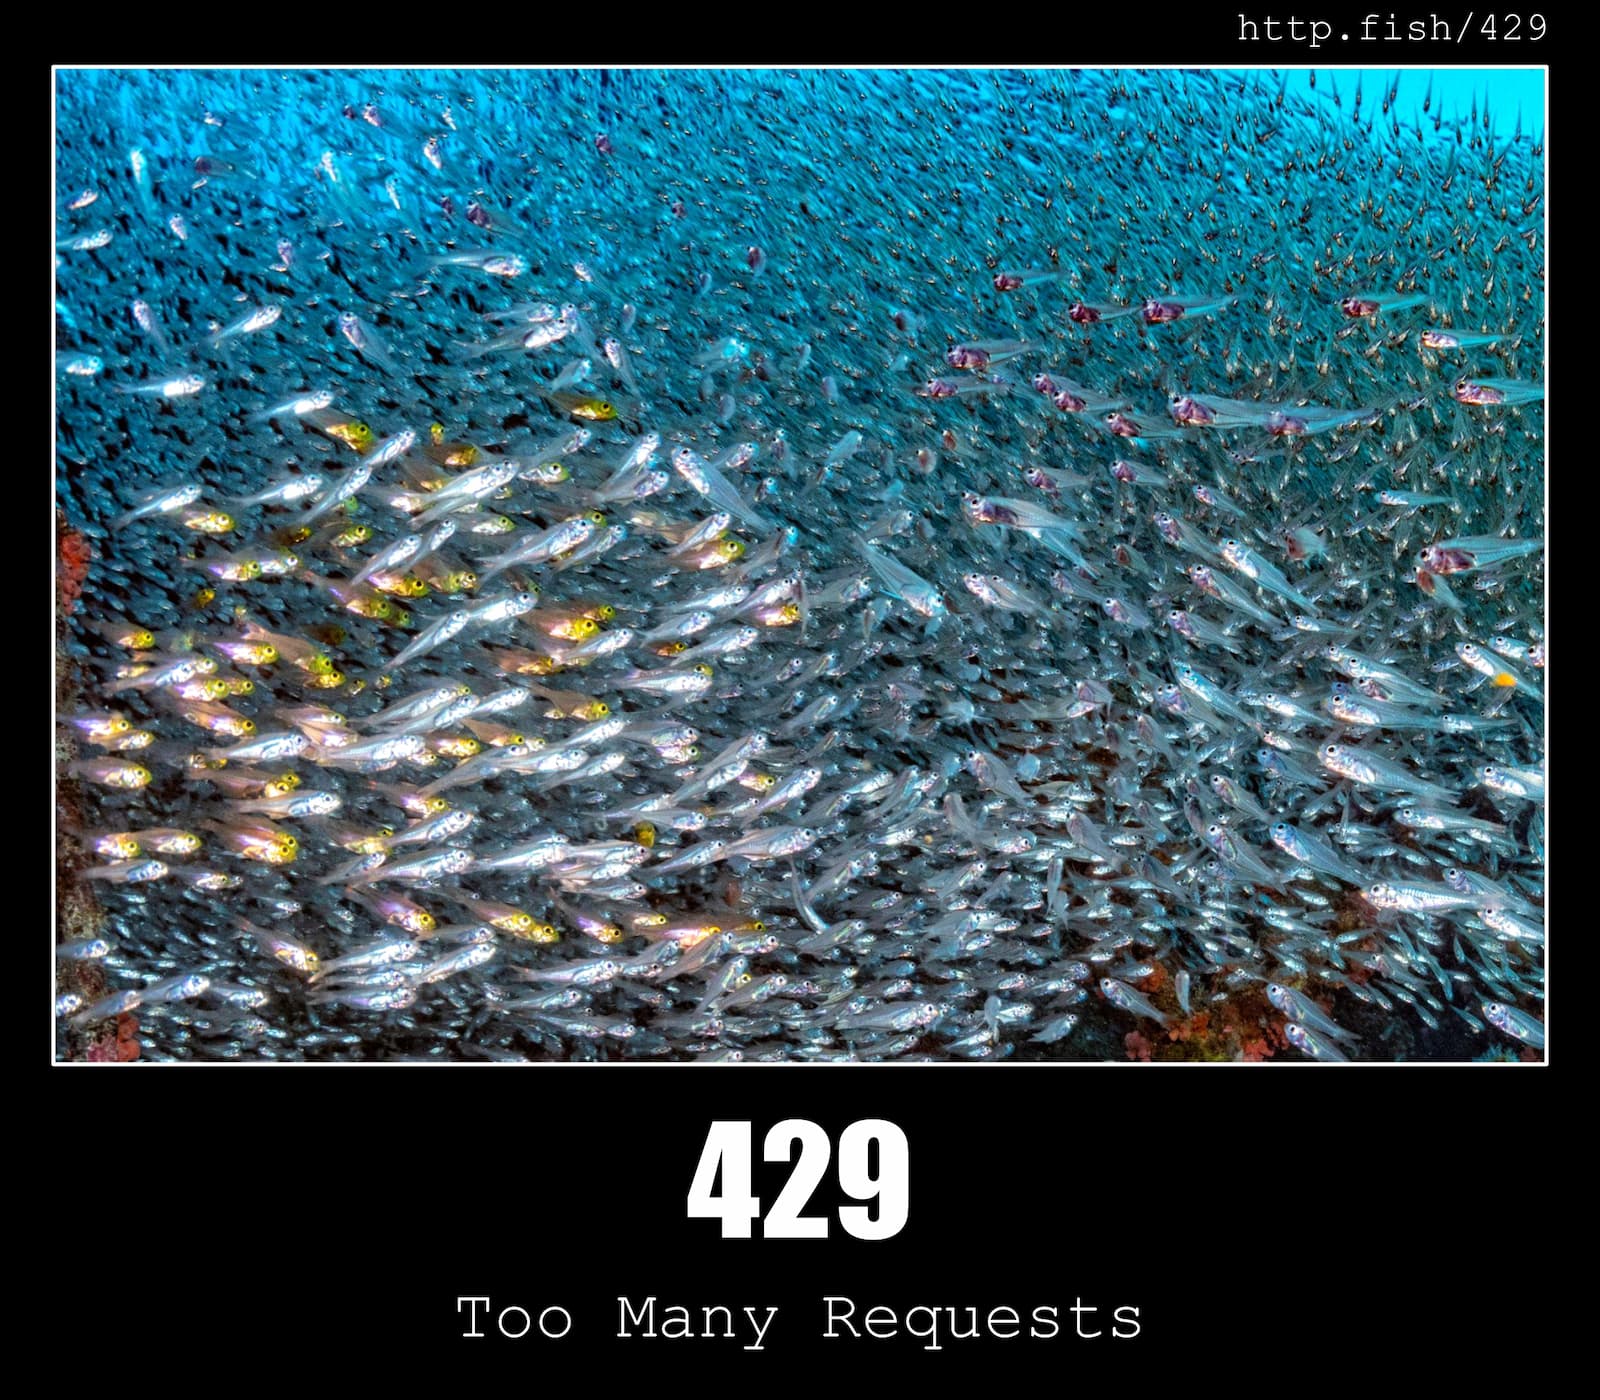 HTTP Status Code 429 Too Many Requests & Fish